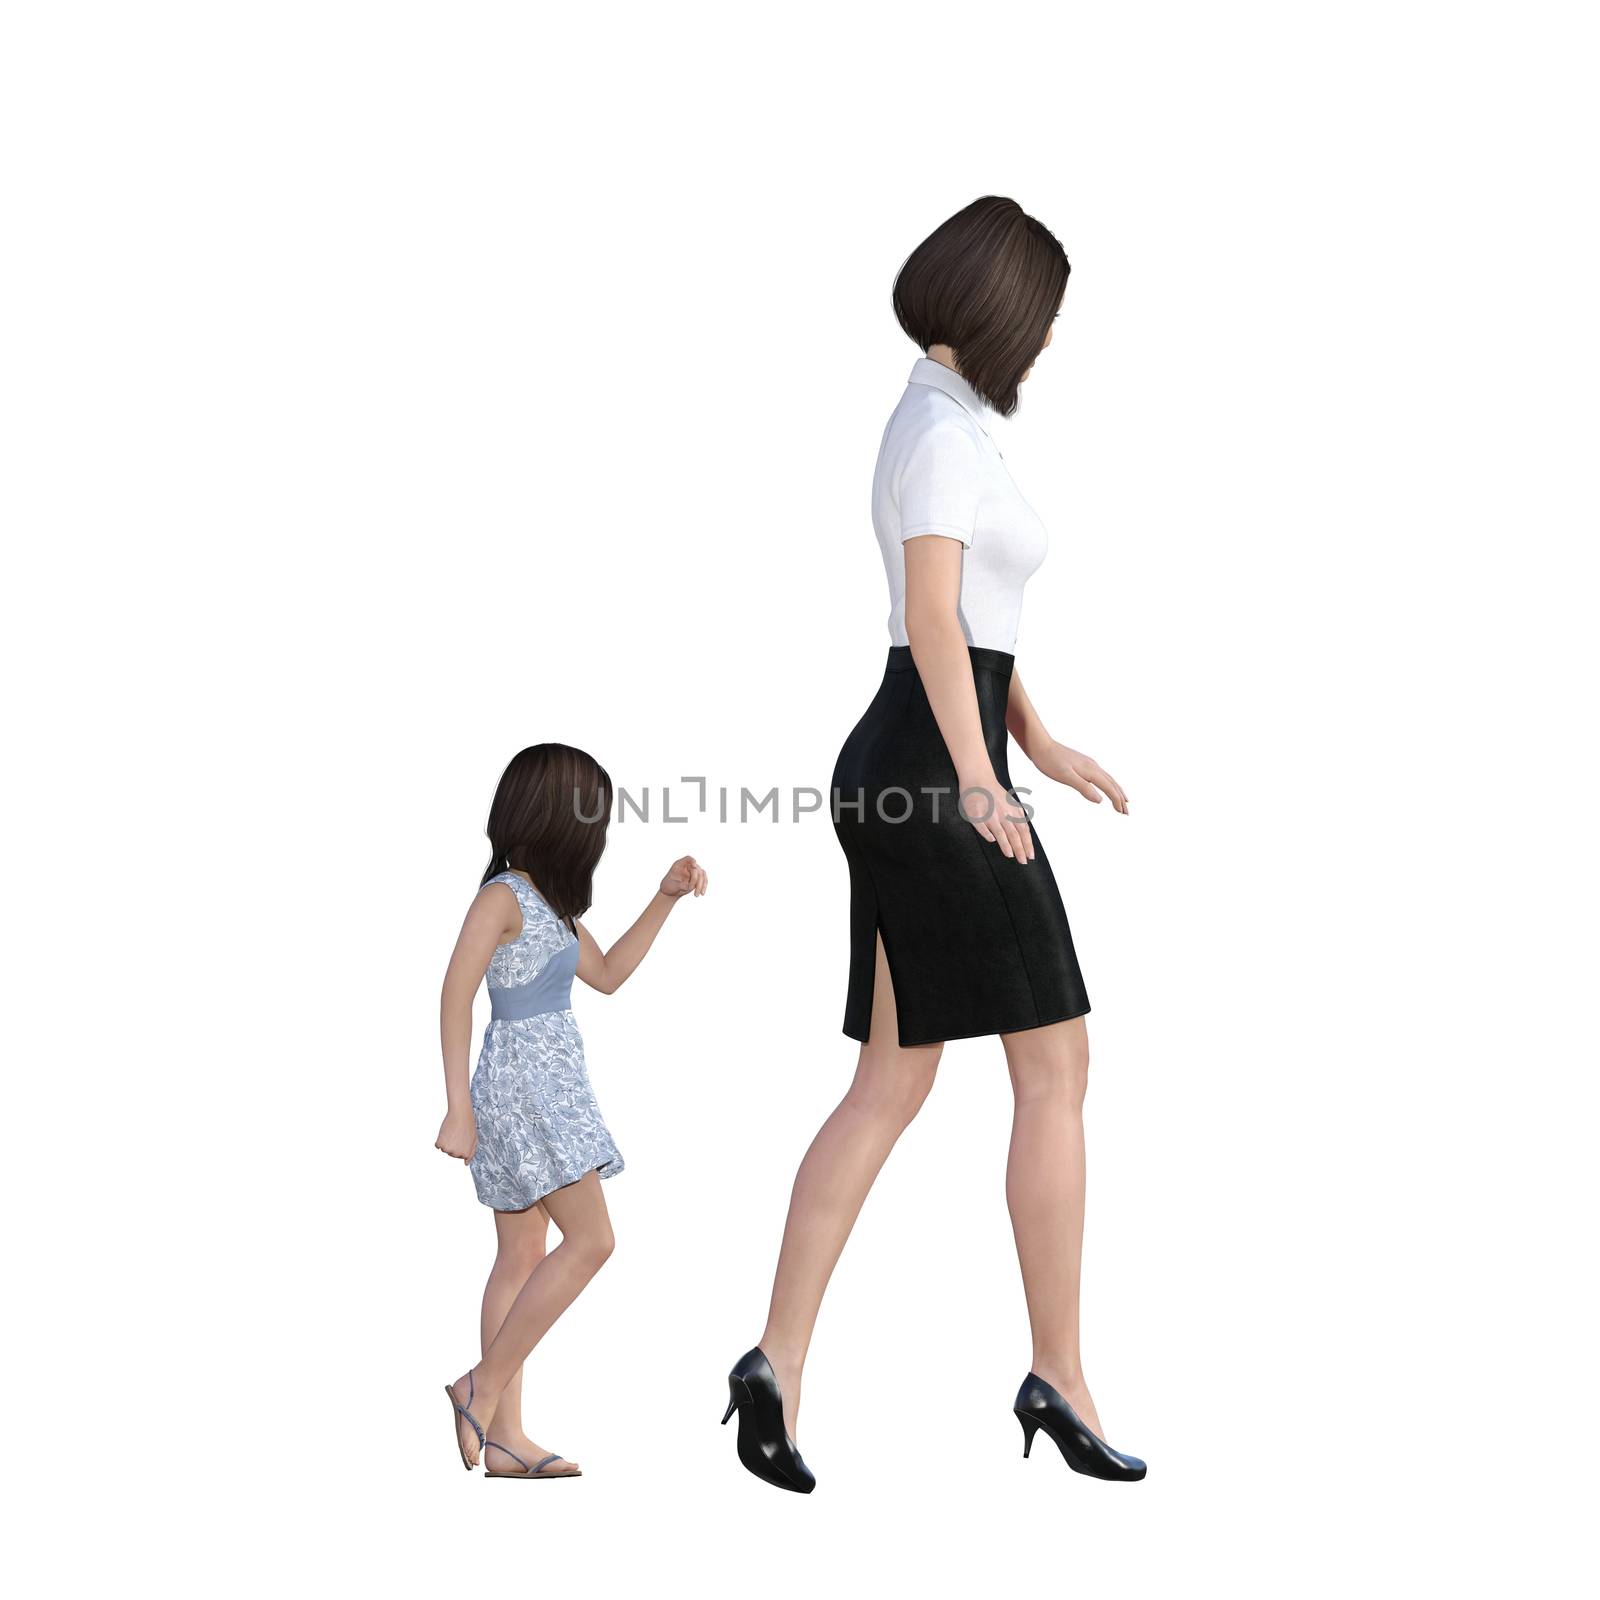 Mother Daughter Interaction of Girl Following Mom as an Illustration Concept